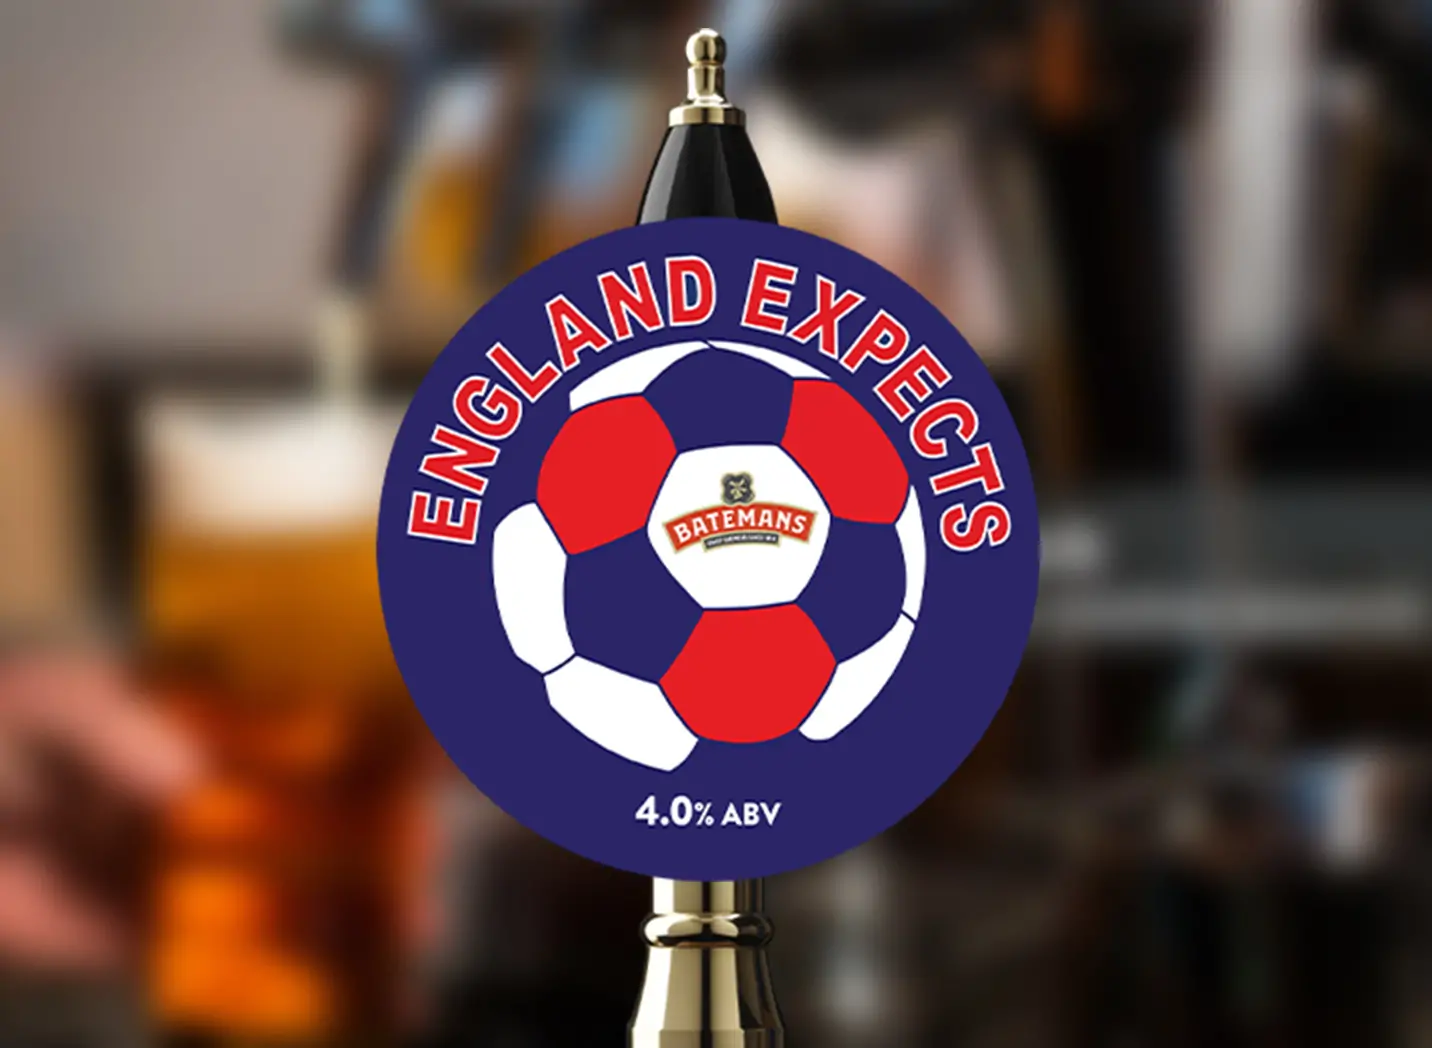 England Expects Beer From Batemans Brewery - Ideal for watching the football